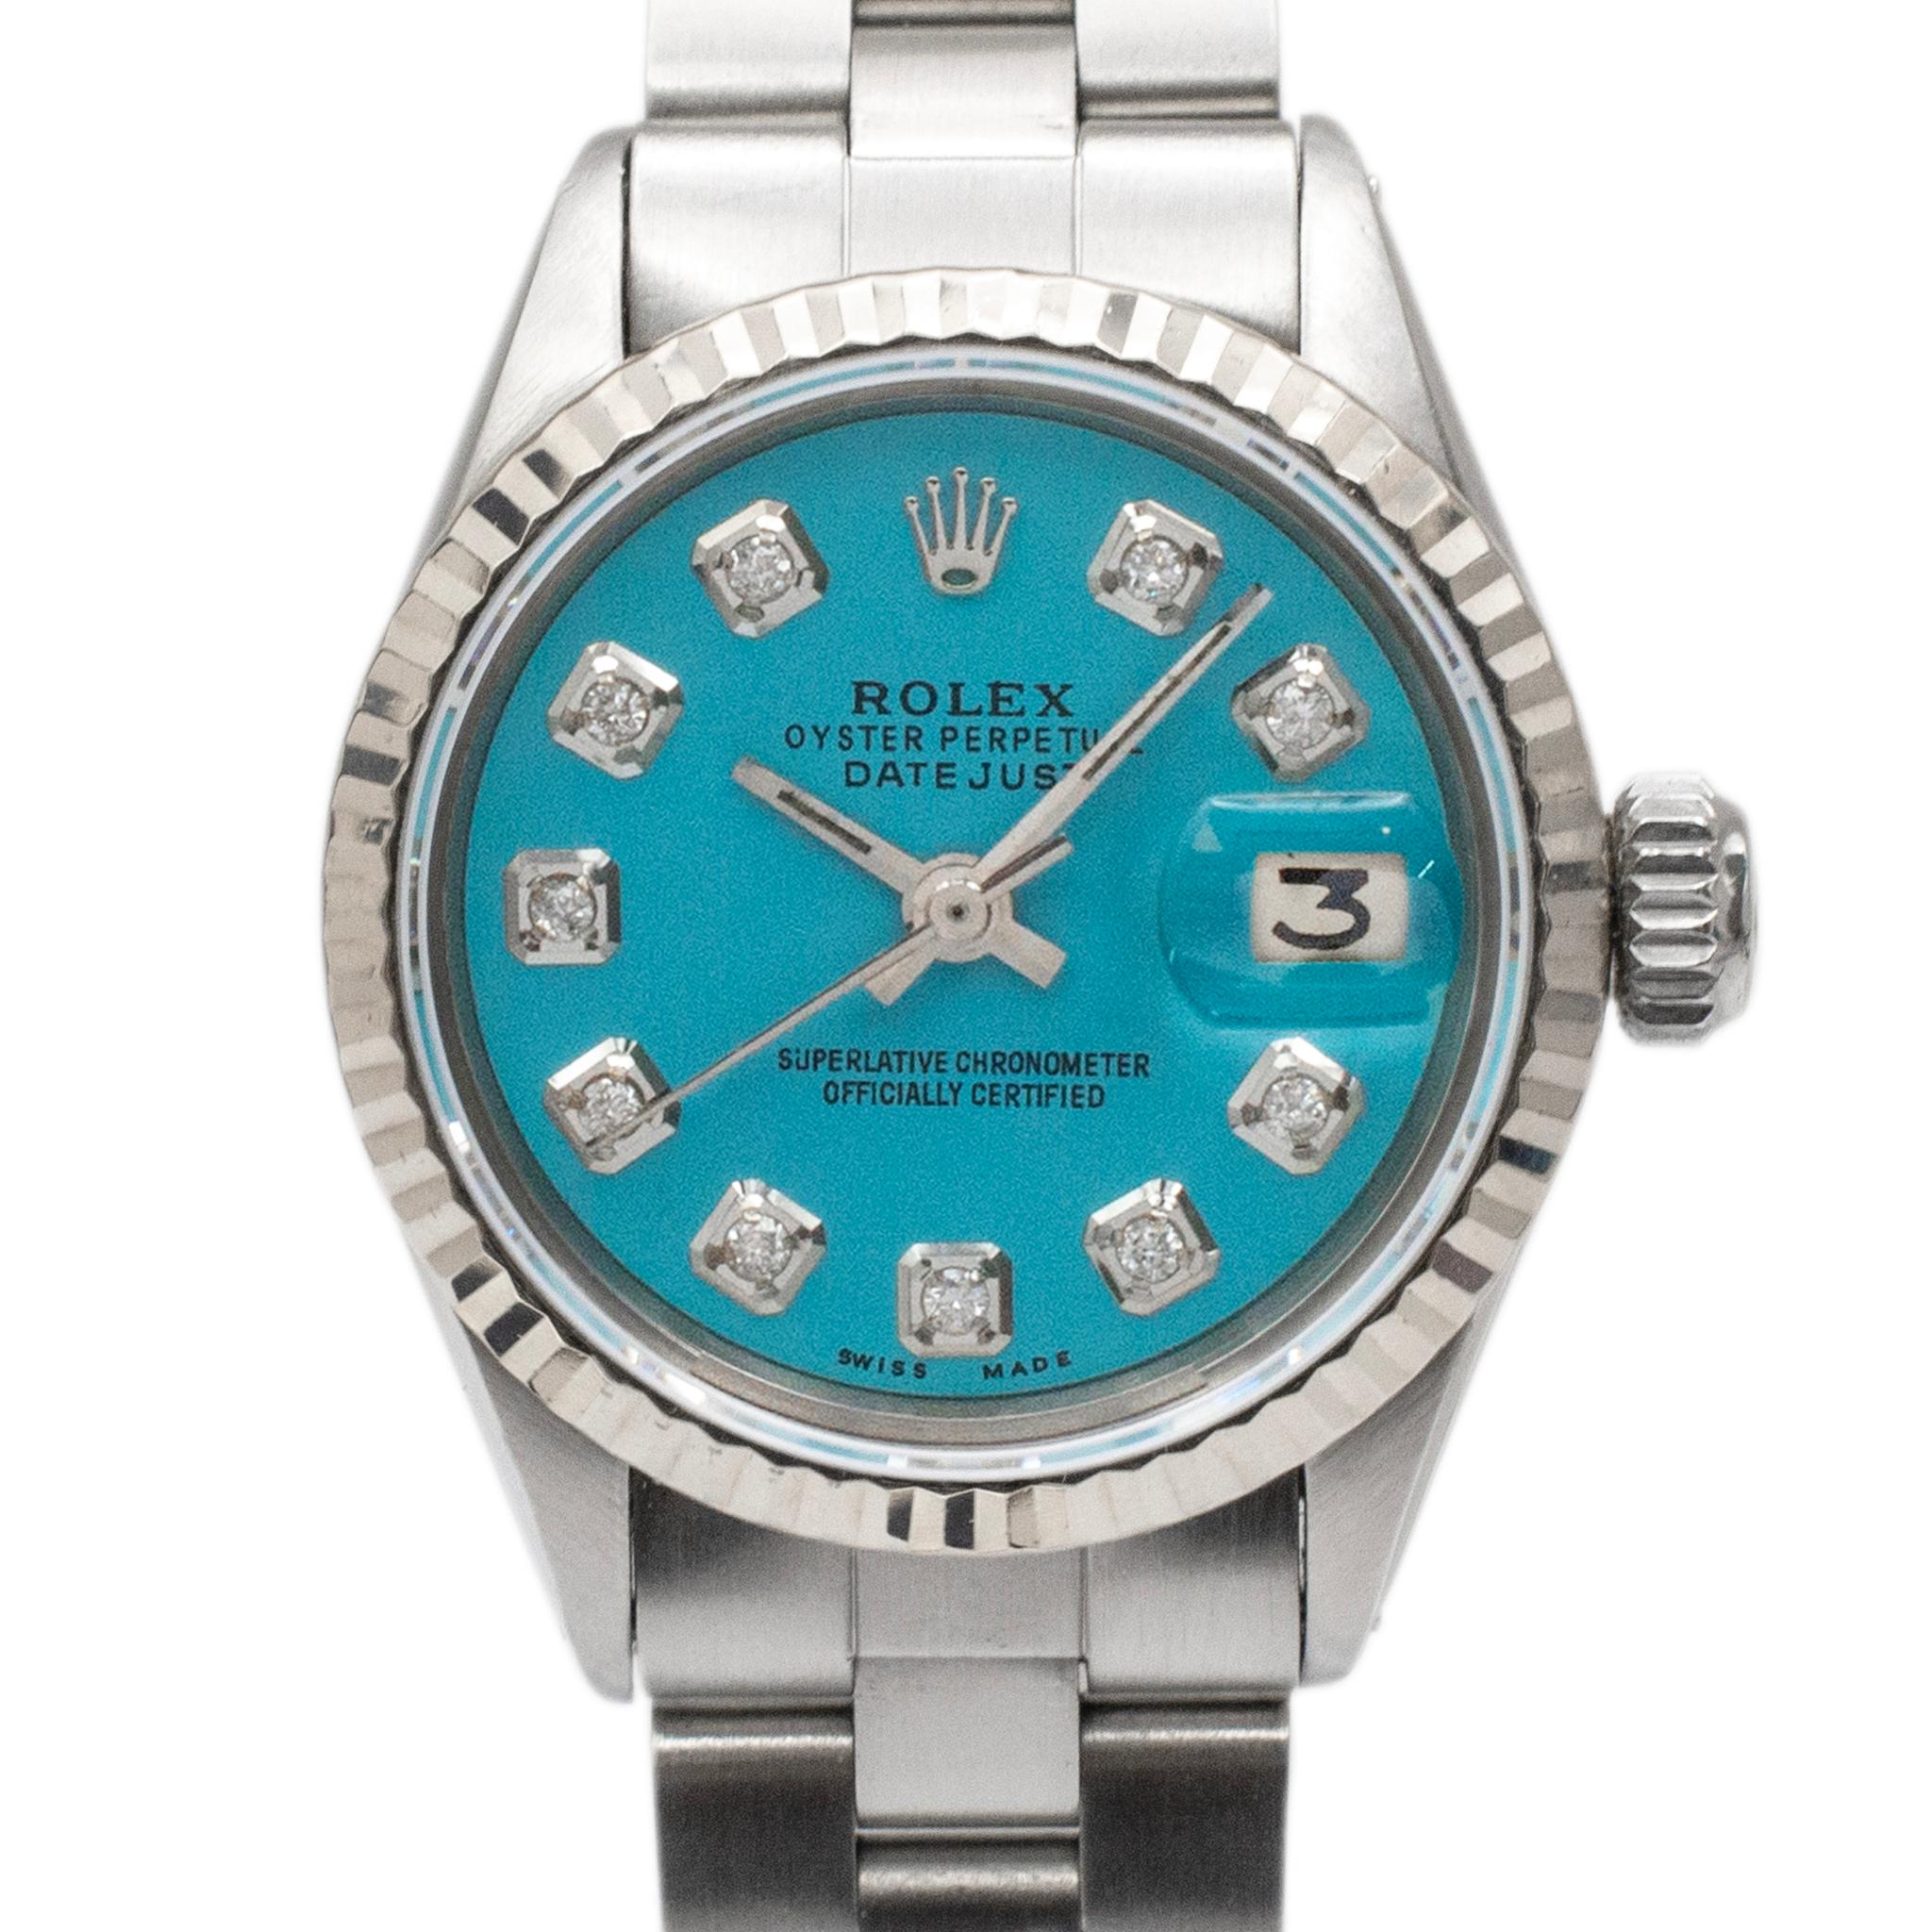 Brand: Rolex

Gender: Ladies

Metal Type: Stainless Steel

Diameter: 26.00 mm

Weight: 46.51 Grams

Ladies stainless steel diamond ROLEX Swiss made watch. The metal was tested and determined to be stainless steel. The 